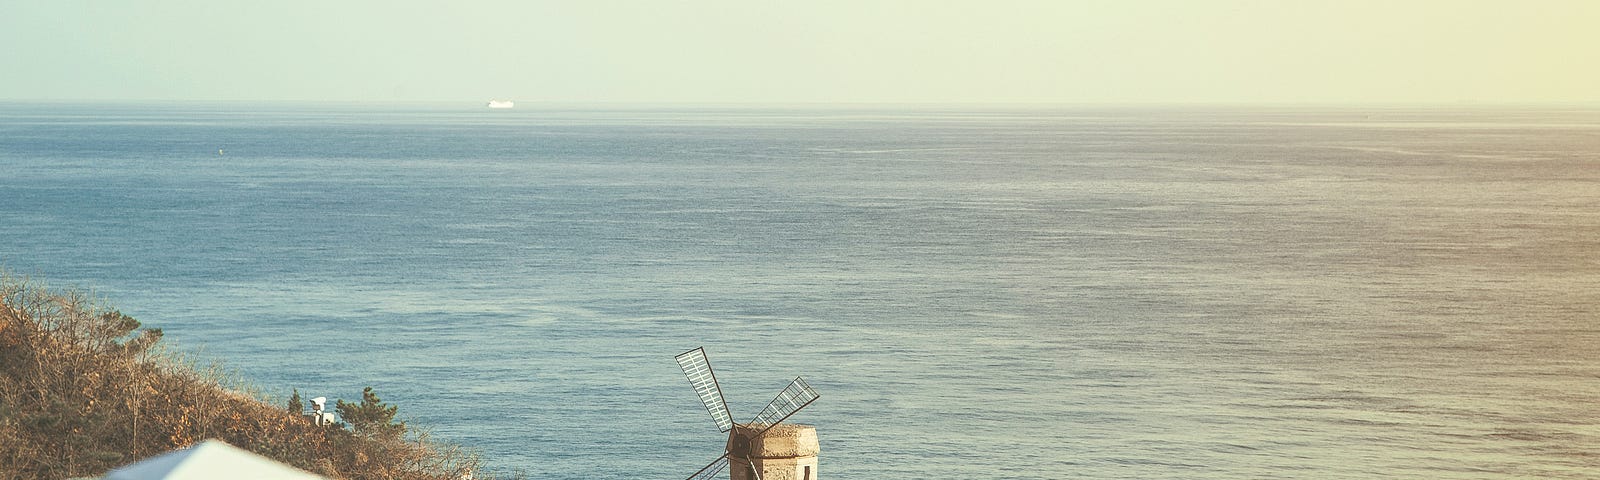 A windmill by the sea on a sunny day